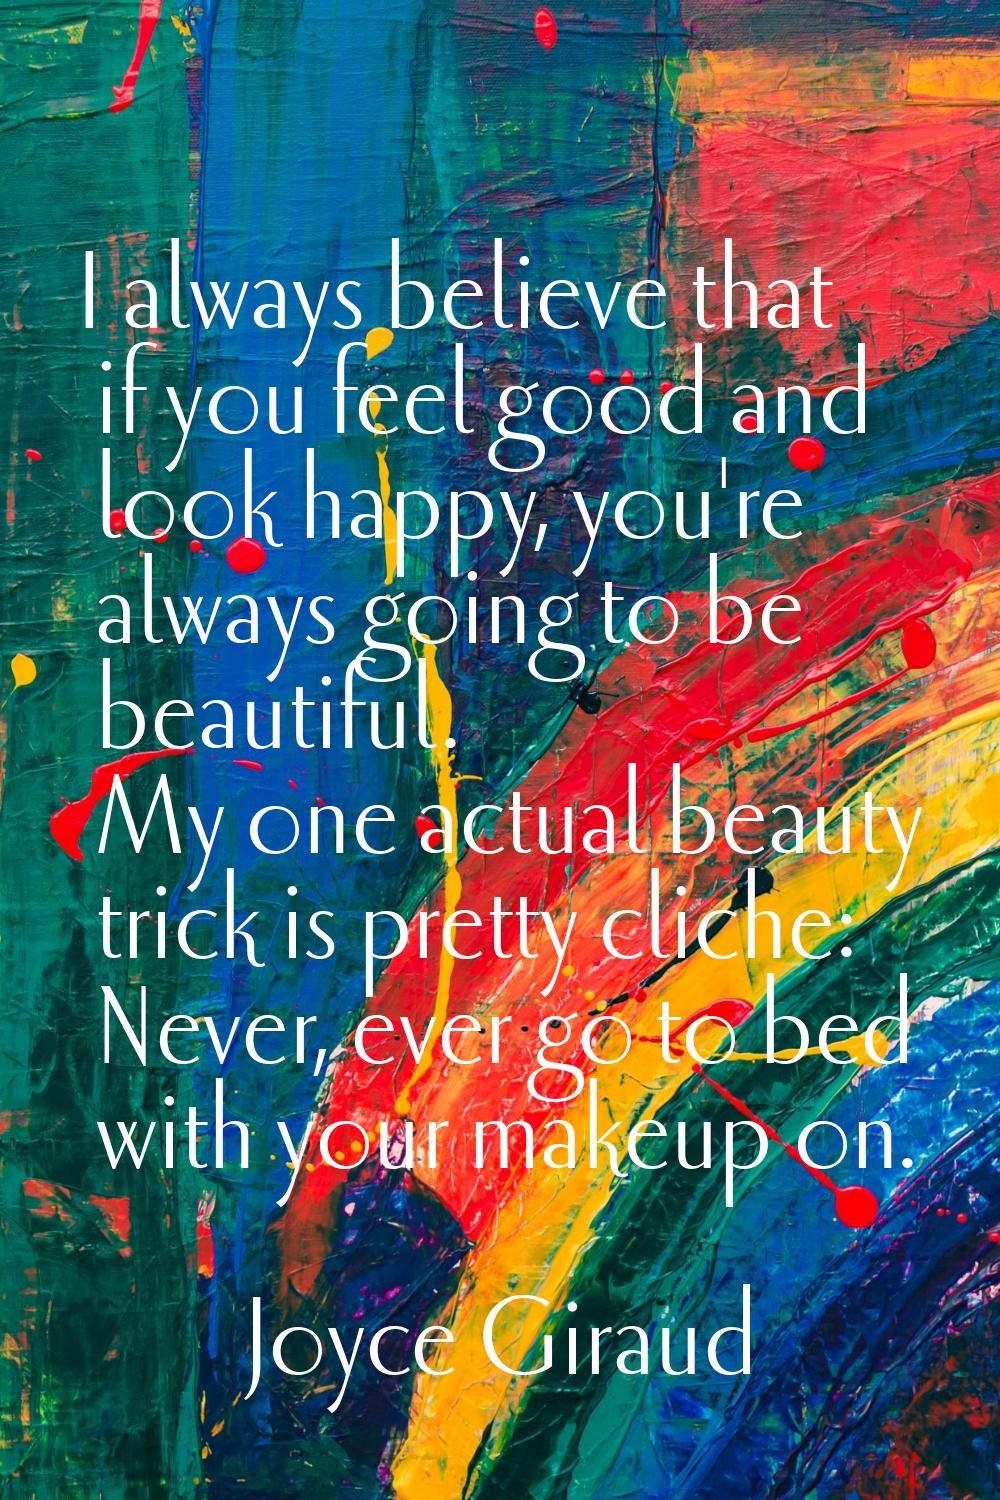 I always believe that if you feel good and look happy, you're always going to be beautiful. My one 